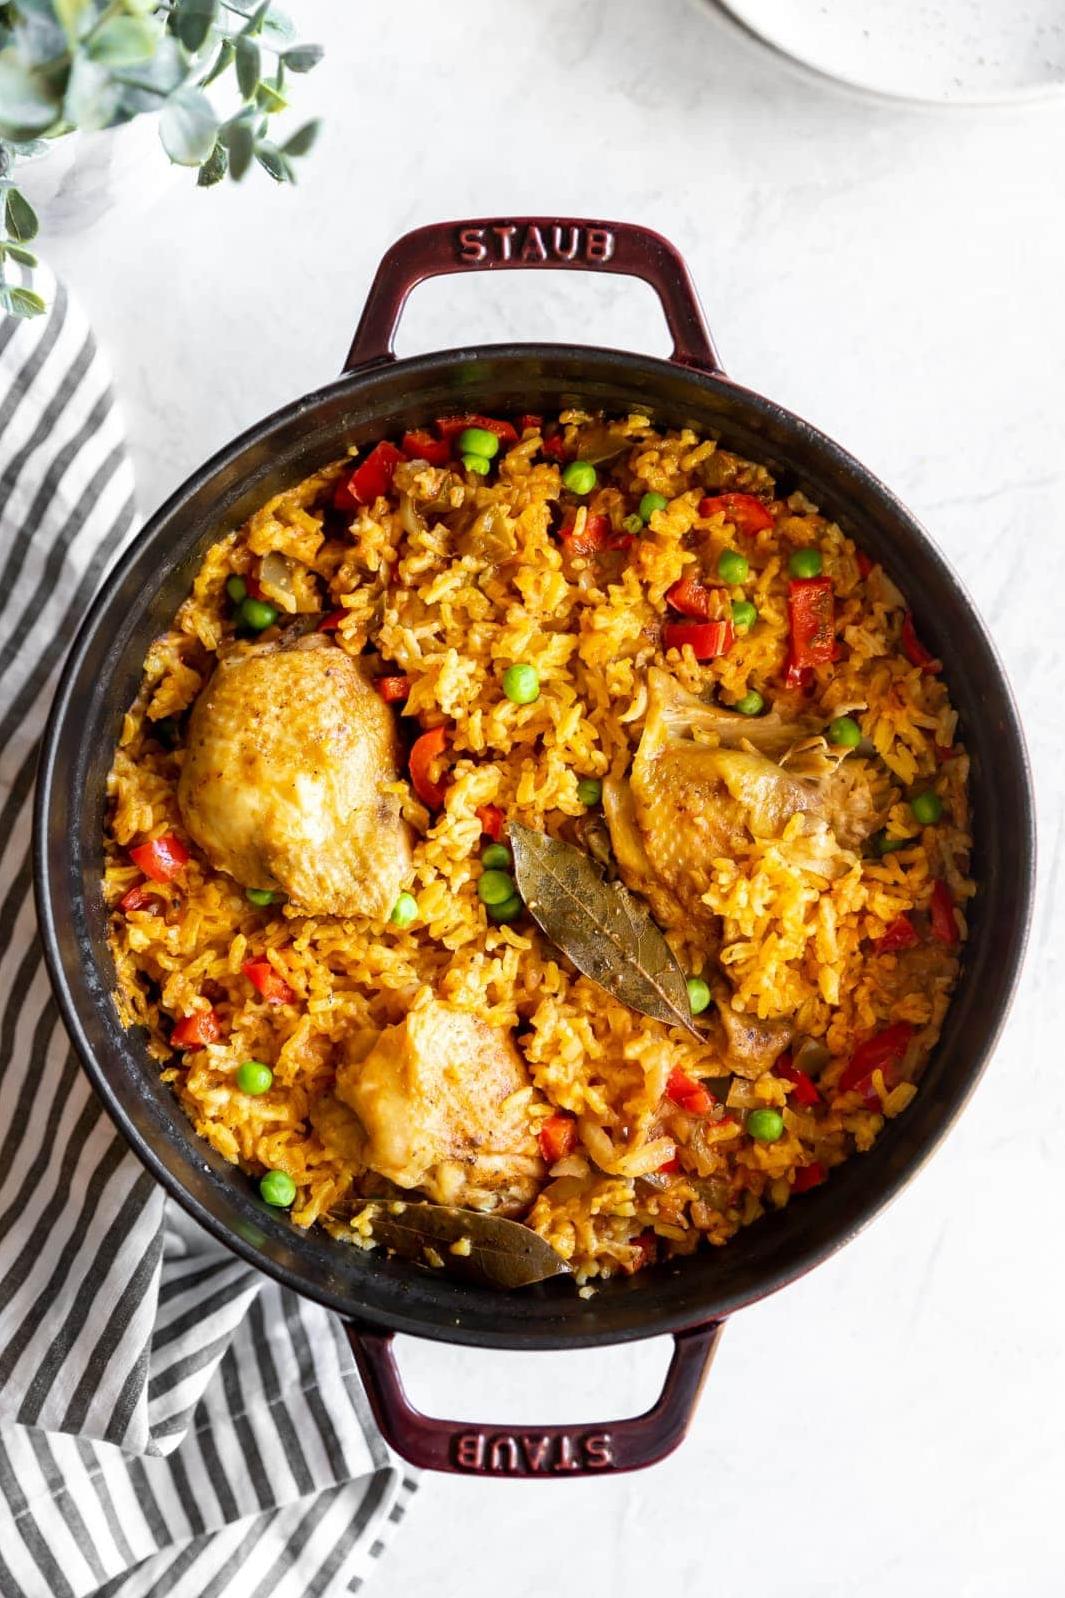  A colorful plate of traditional arroz con pollo - Cuban style